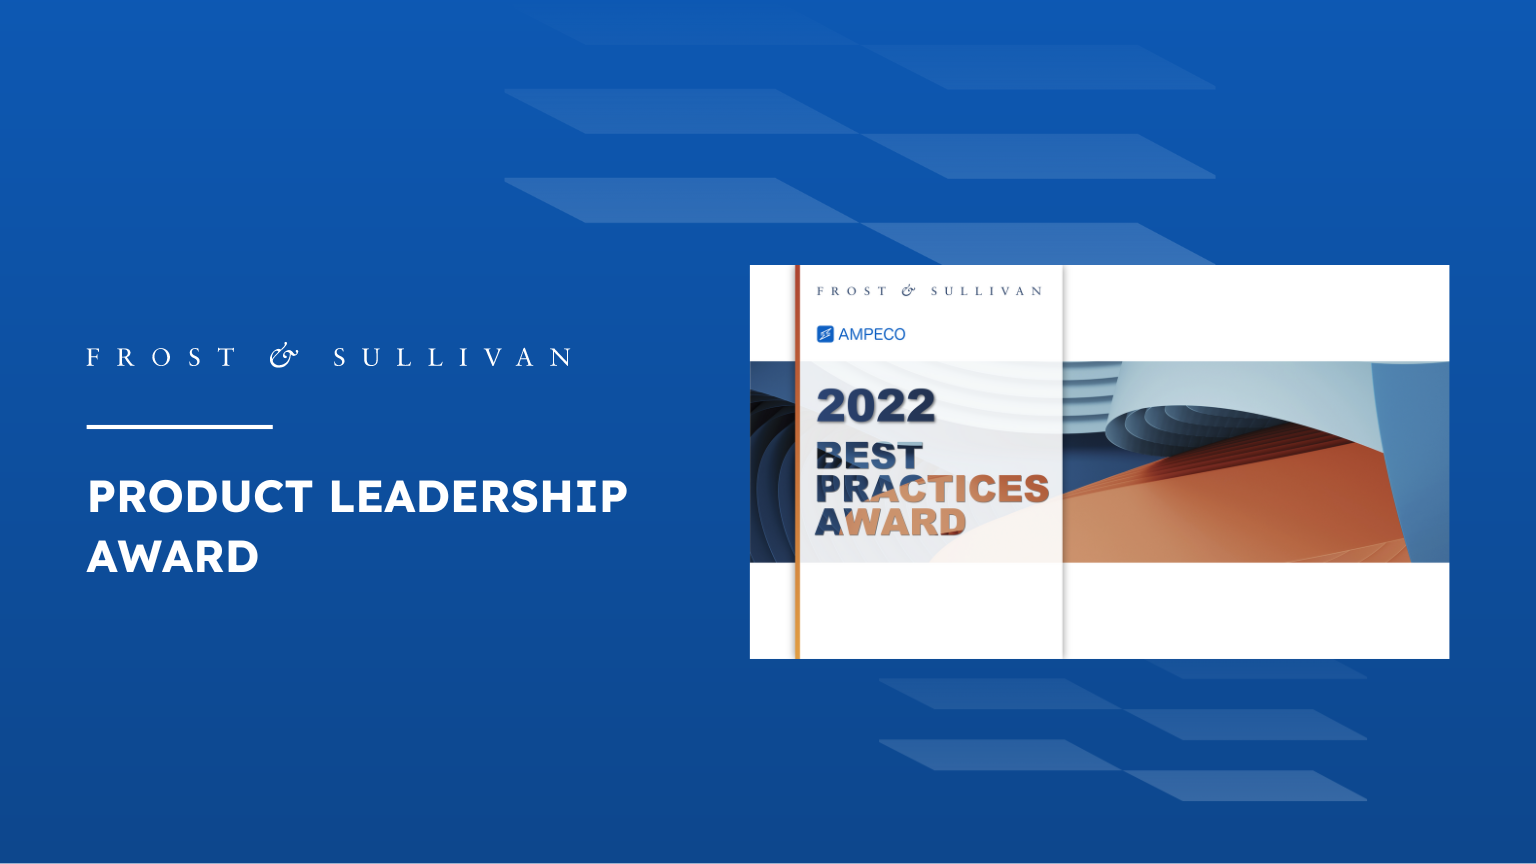 Frost & Sullivan Recognizes AeC as Company of the Year for Its